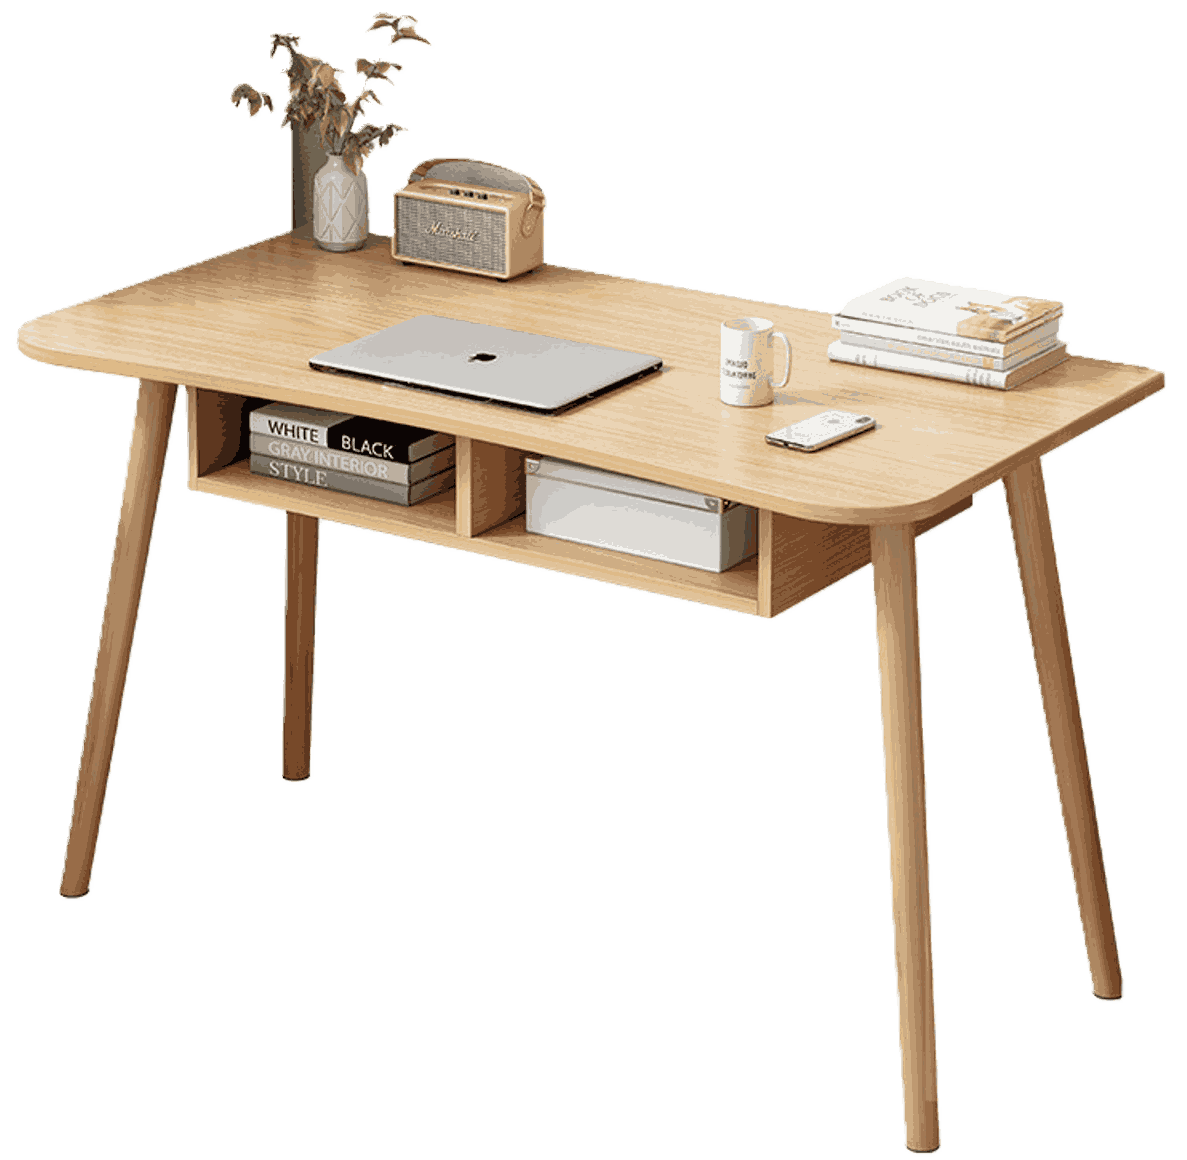 Wooden Study Tables with Chair: Comfort Meets Style A Perfect Combo - Hyderabad Furniture